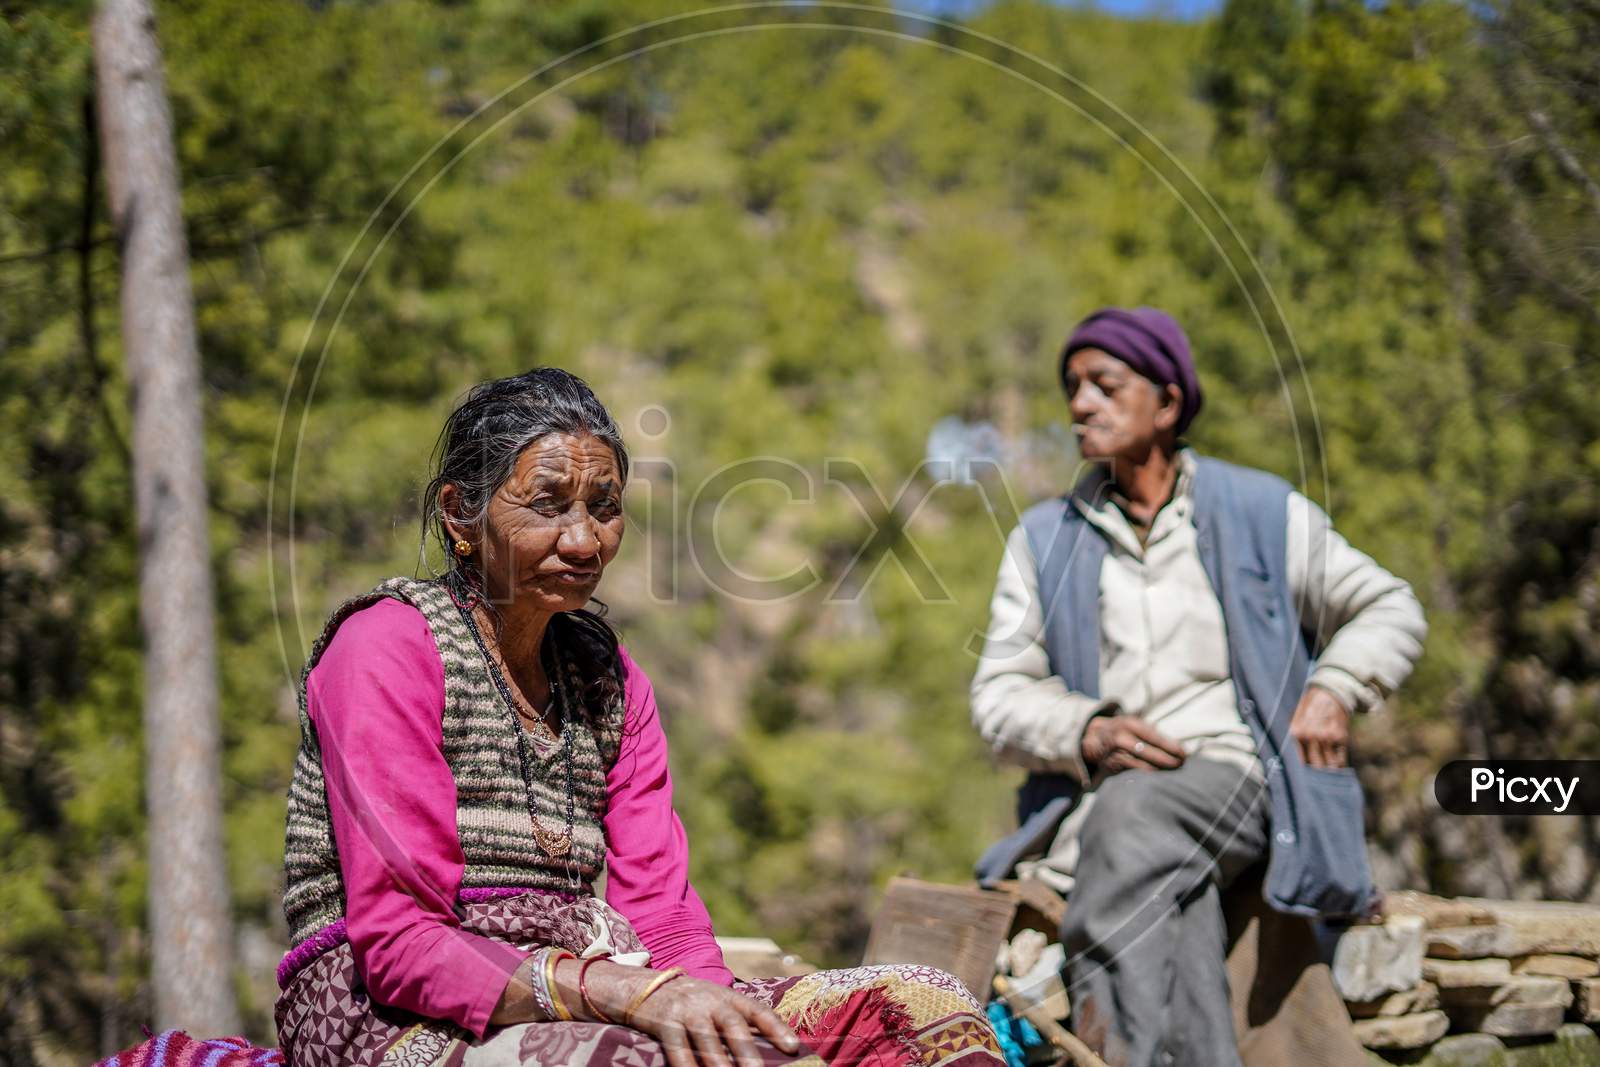 Almora, Uttrakhand / India- June 4 2020: A Photo Of An Old Aged Couple Sitting In A Forest, Man Being Out Of Focus, Old Woman Is In Focus While Seeing Into The Camera.